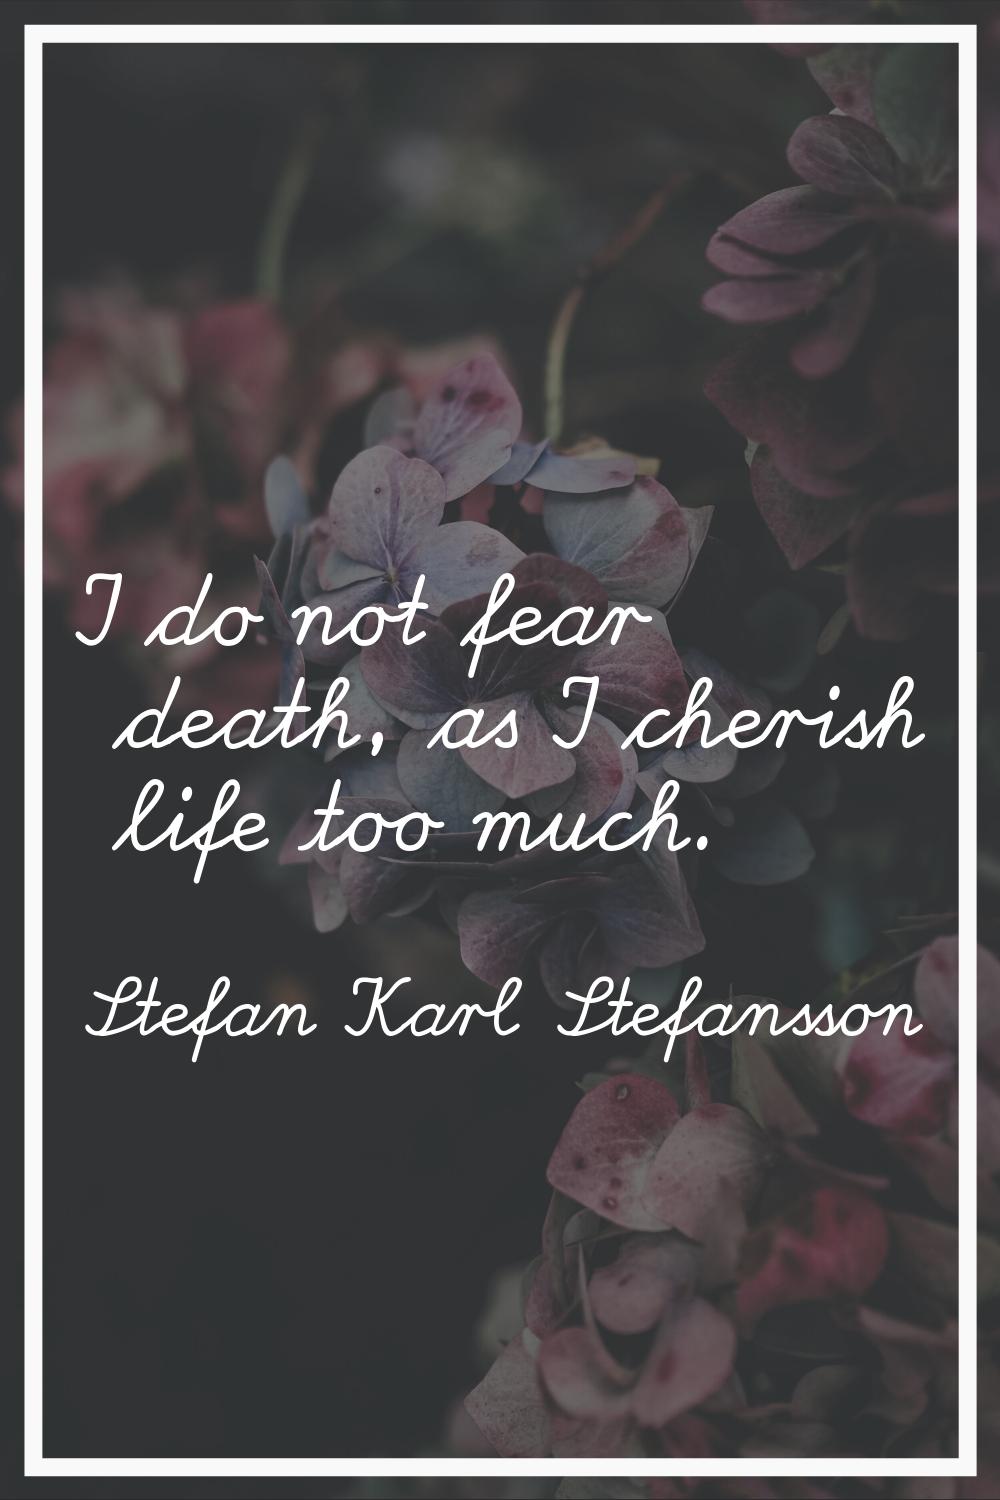 I do not fear death, as I cherish life too much.